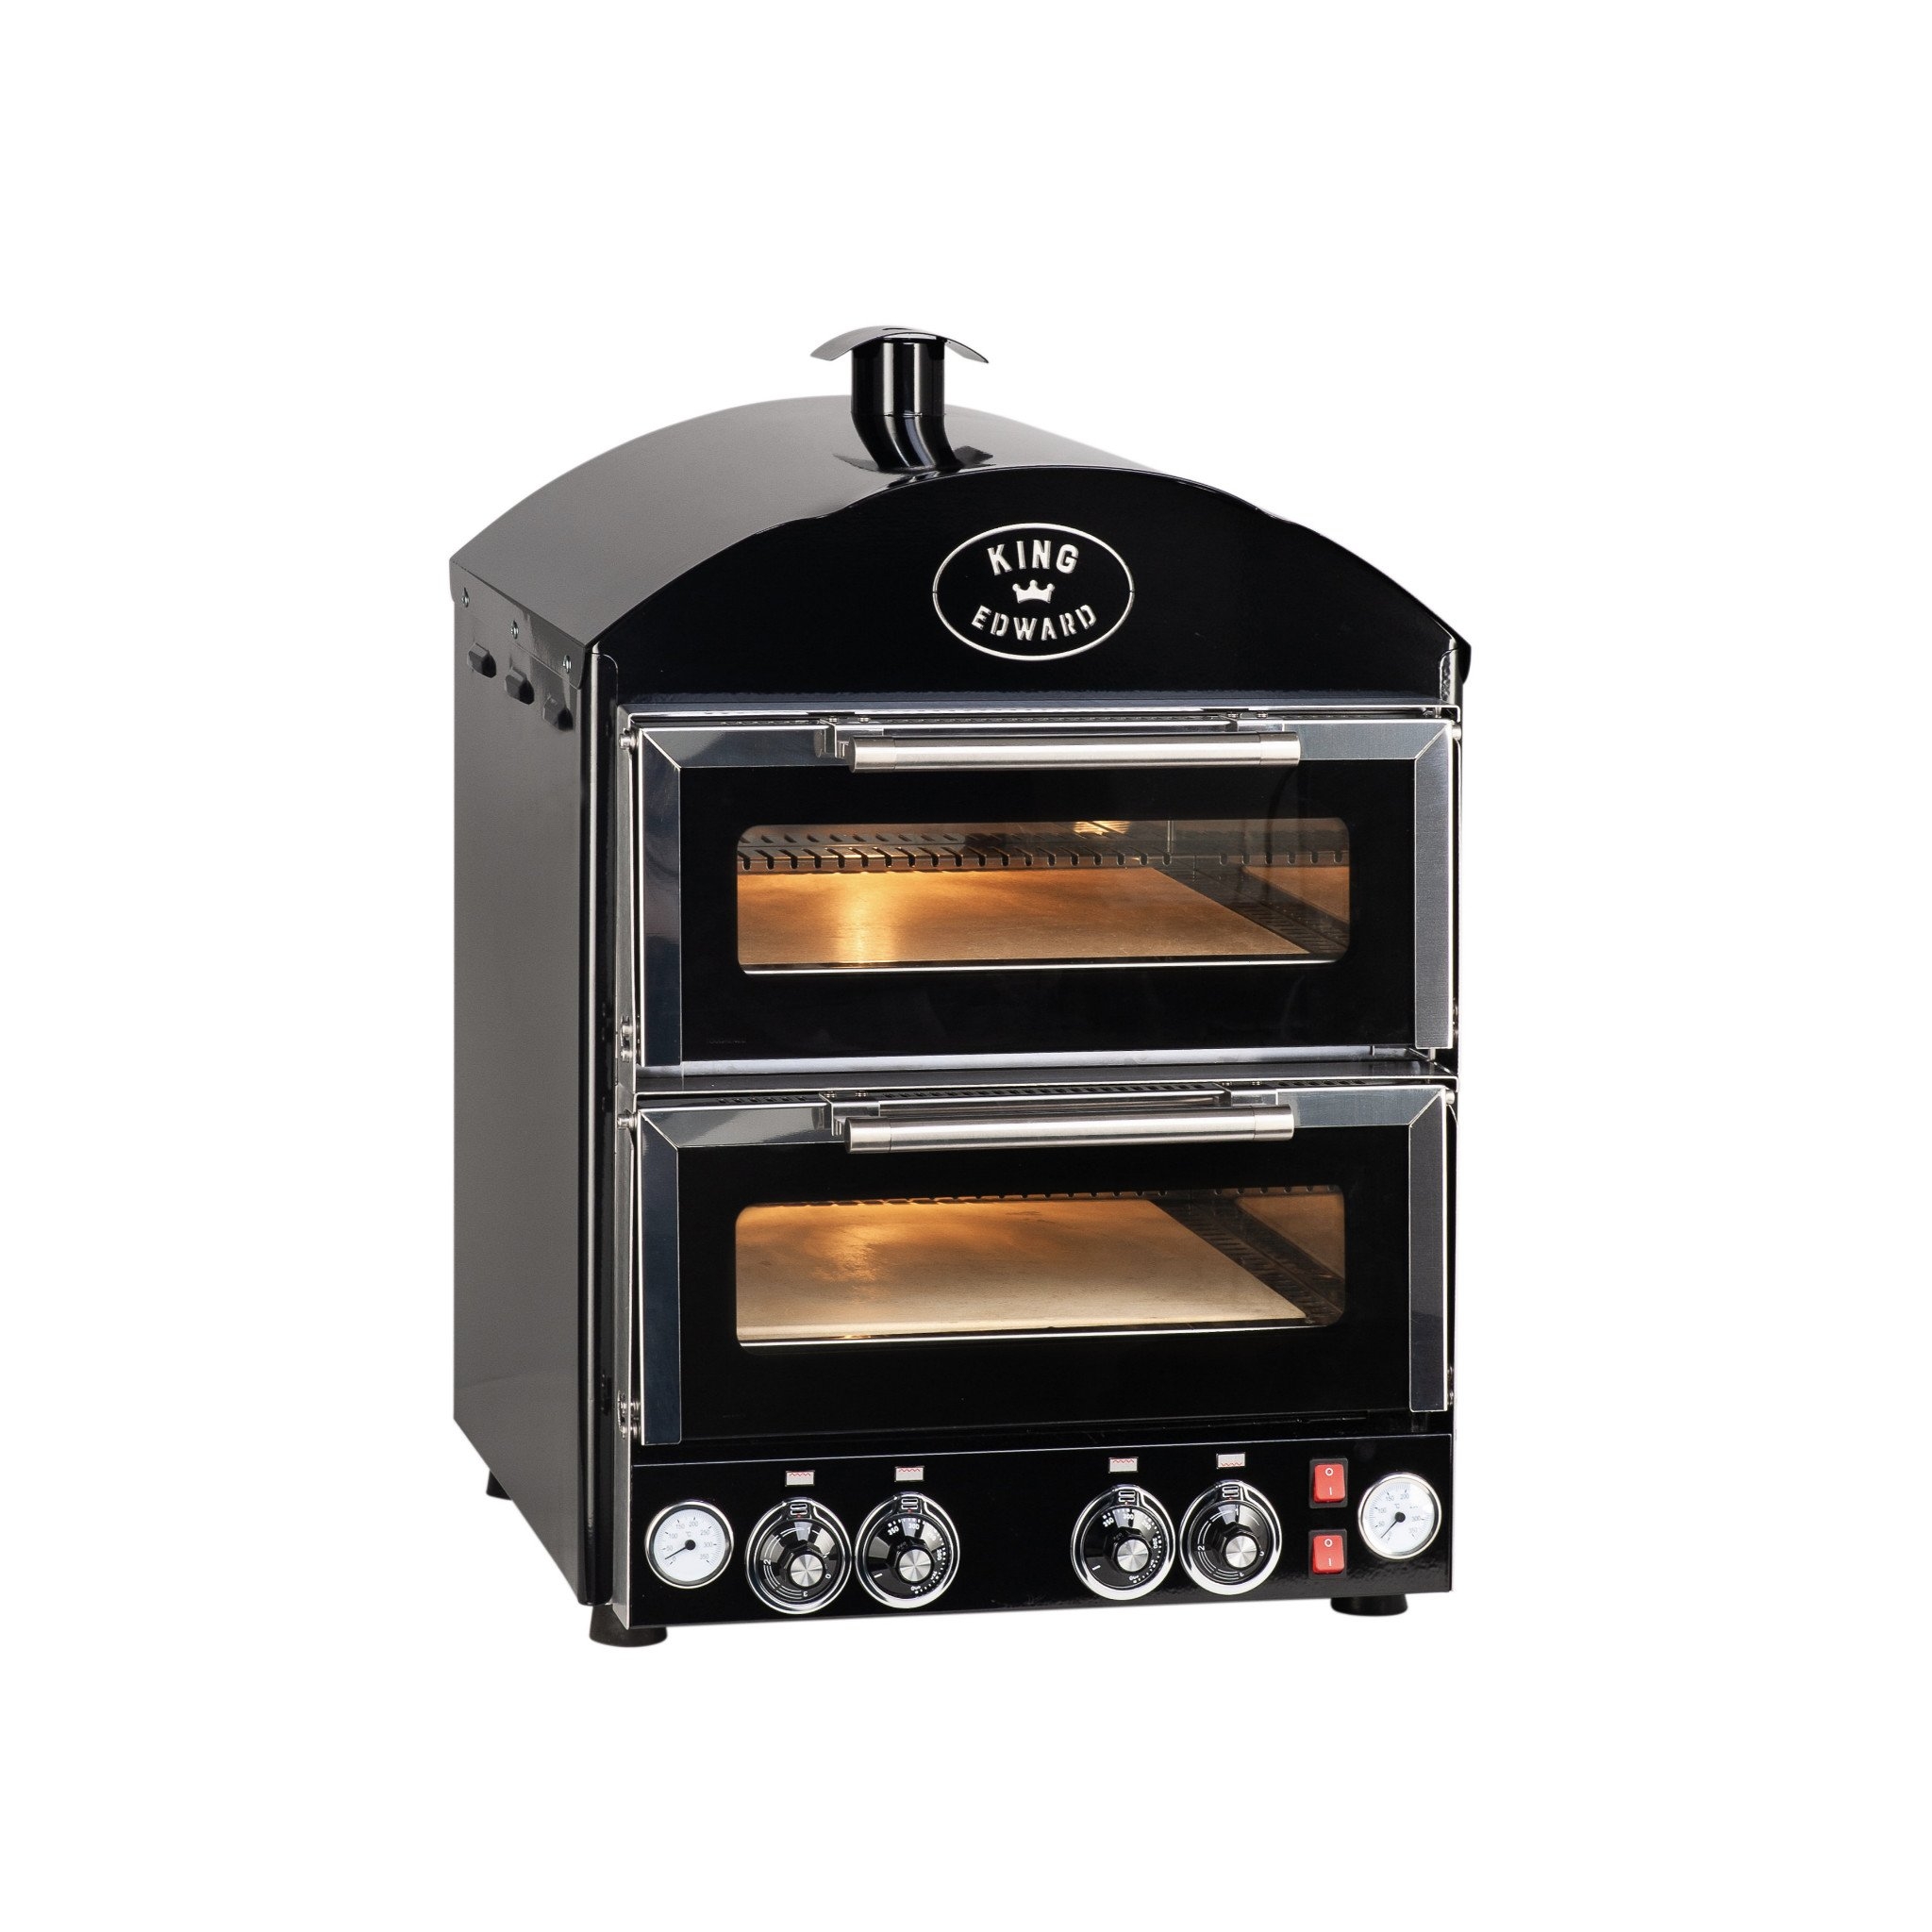 King Edward Stone-Baked Double Outdoor Pizza King Oven – Black – Outdoor Pizza Oven – Forno Boutique